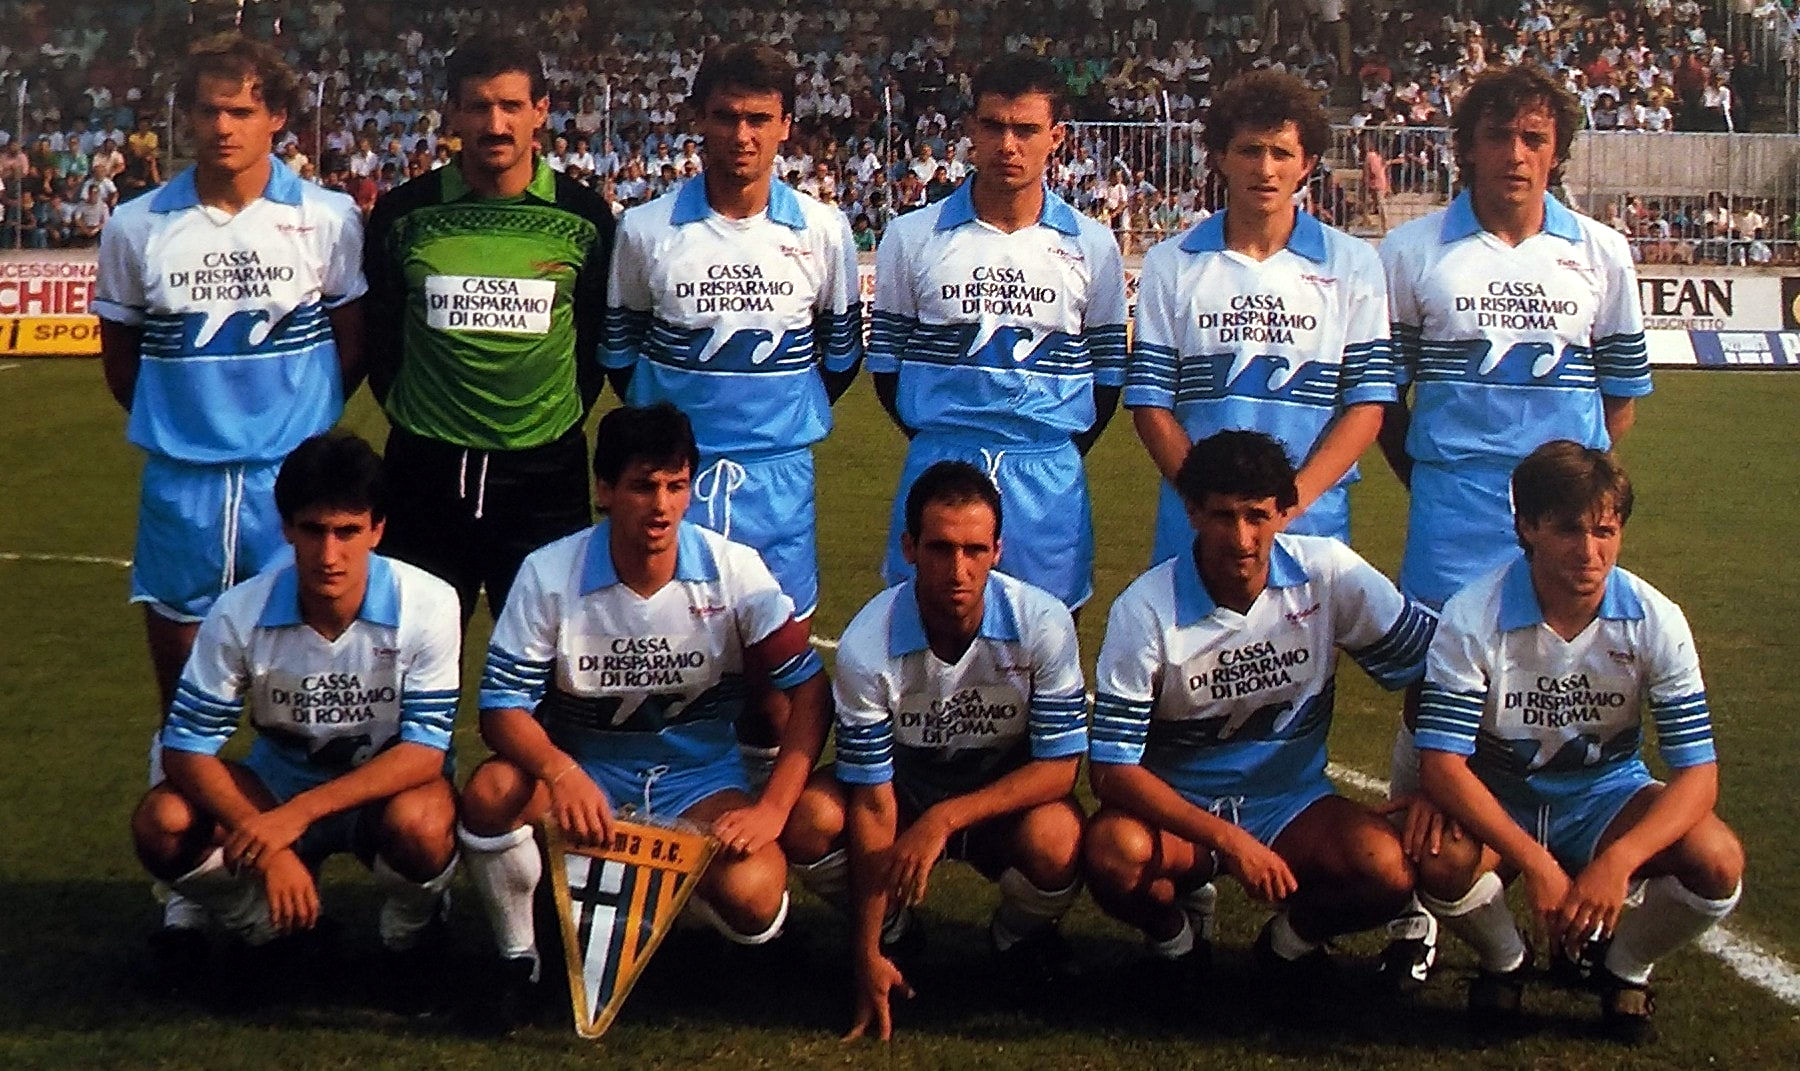 They started the season with the ambition to be promoted but rather ended up playing a dramatic relegation playout against Campobasso: This, gentleman, is the Lazio roster from the 1986-87 season